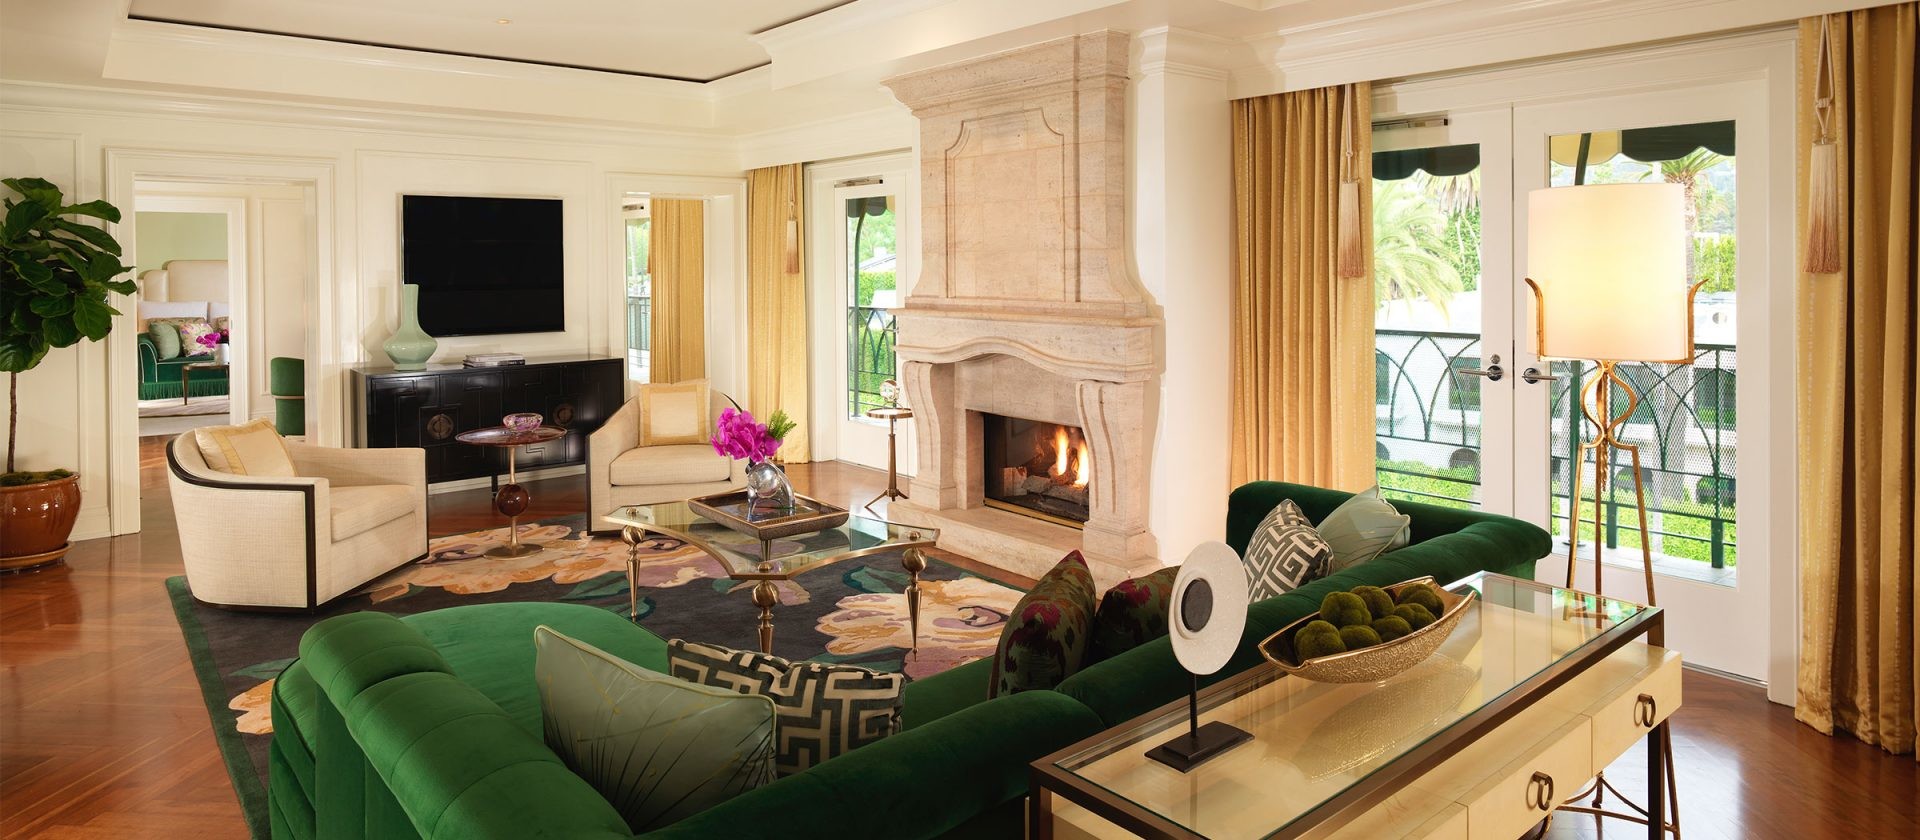 news-main-the-beverly-hills-hotels-unveils-new-bungalows-inspired-by-marilyn-monroe-and-howard-hughes.1550595047.jpg